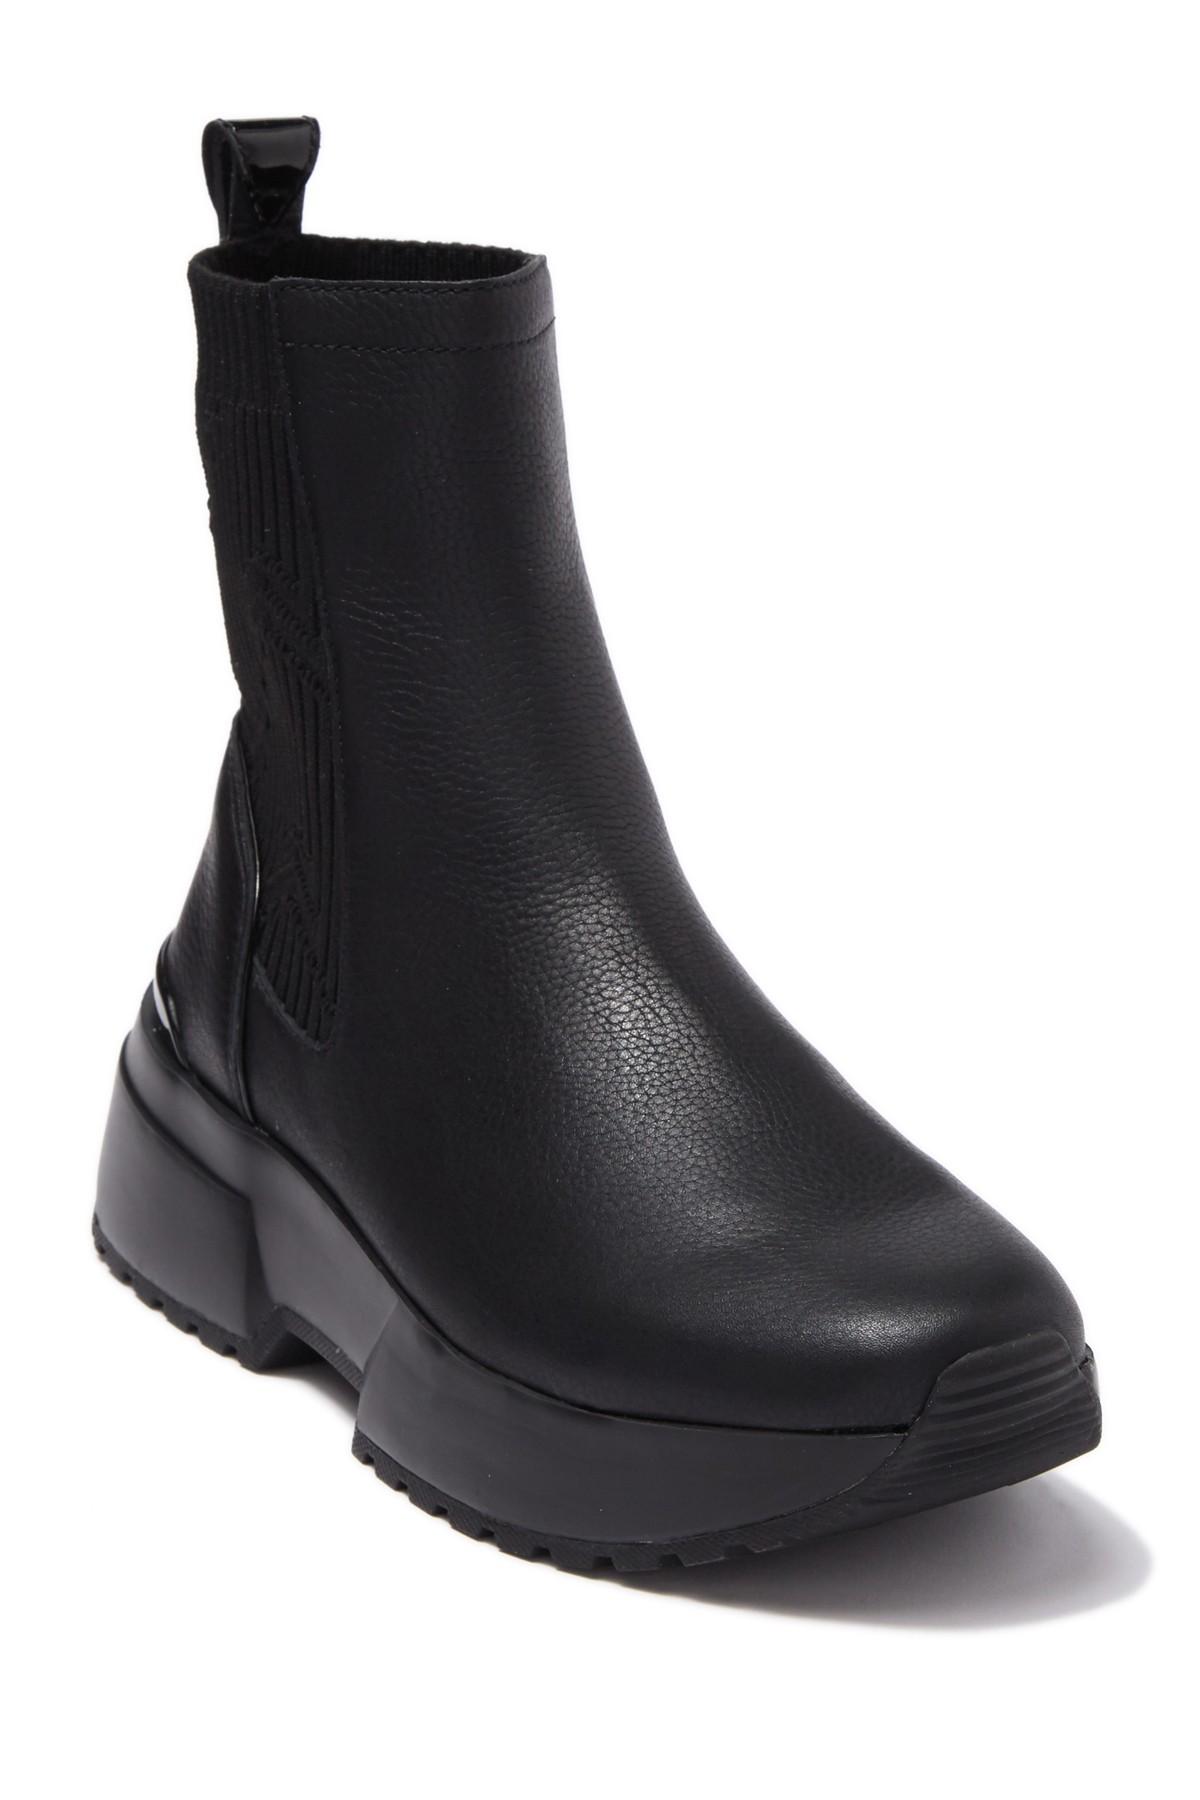 michael kors cosmo leather sneaker boot